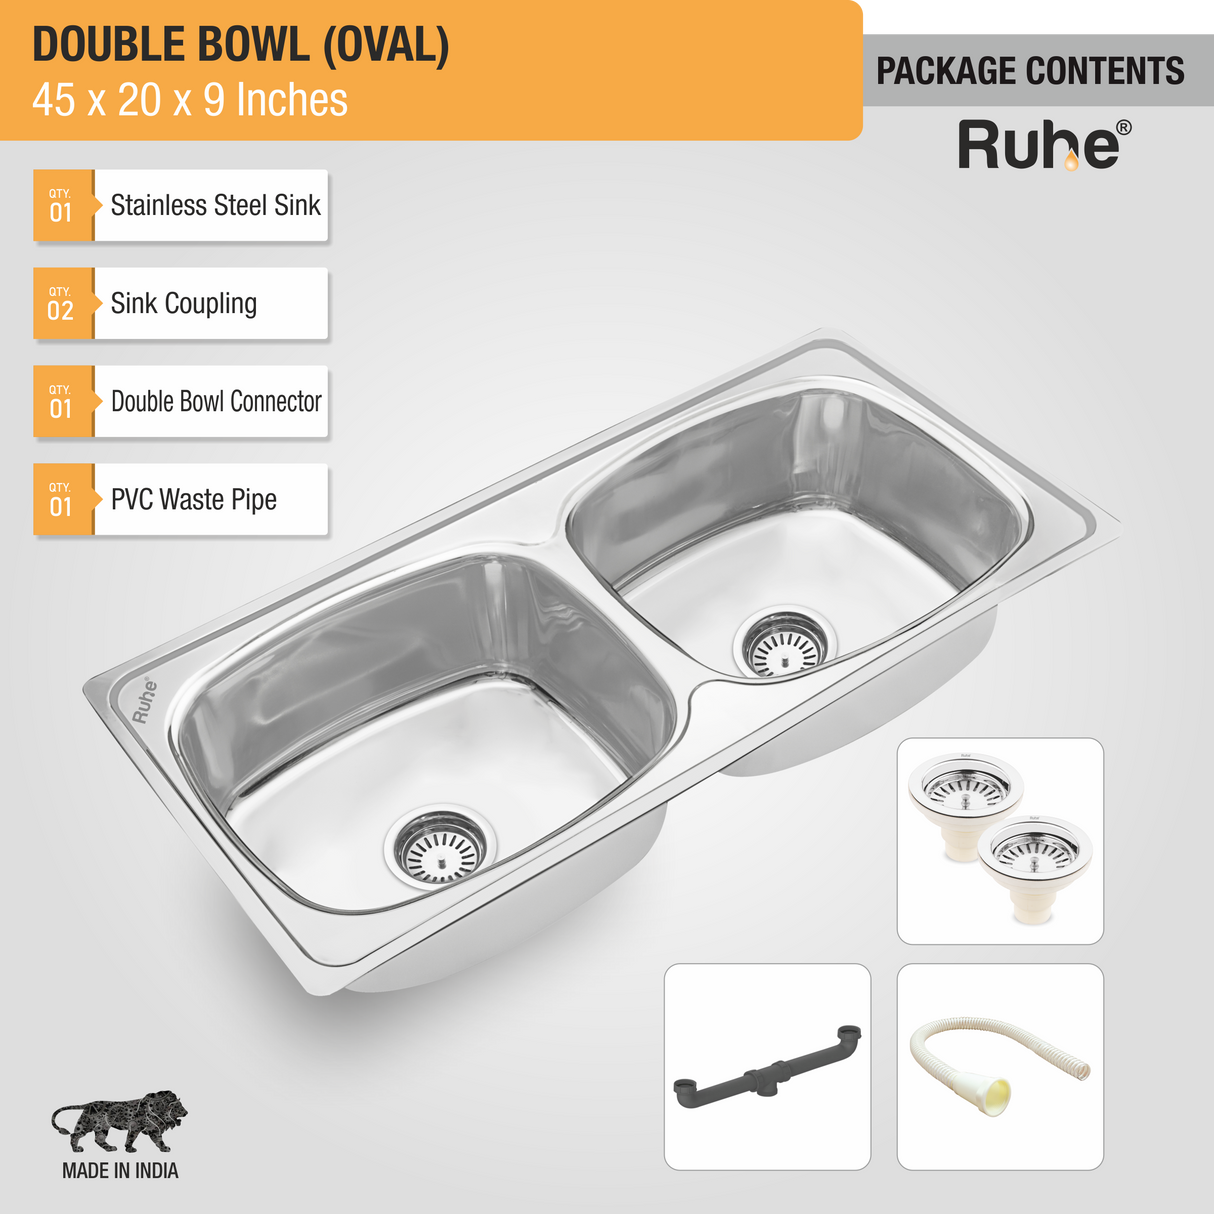 Oval Double Bowl Premium Stainless Steel (45 x 20 x 9 inches) Kitchen Sink with sink coupling, double bowl connector, waste pipe